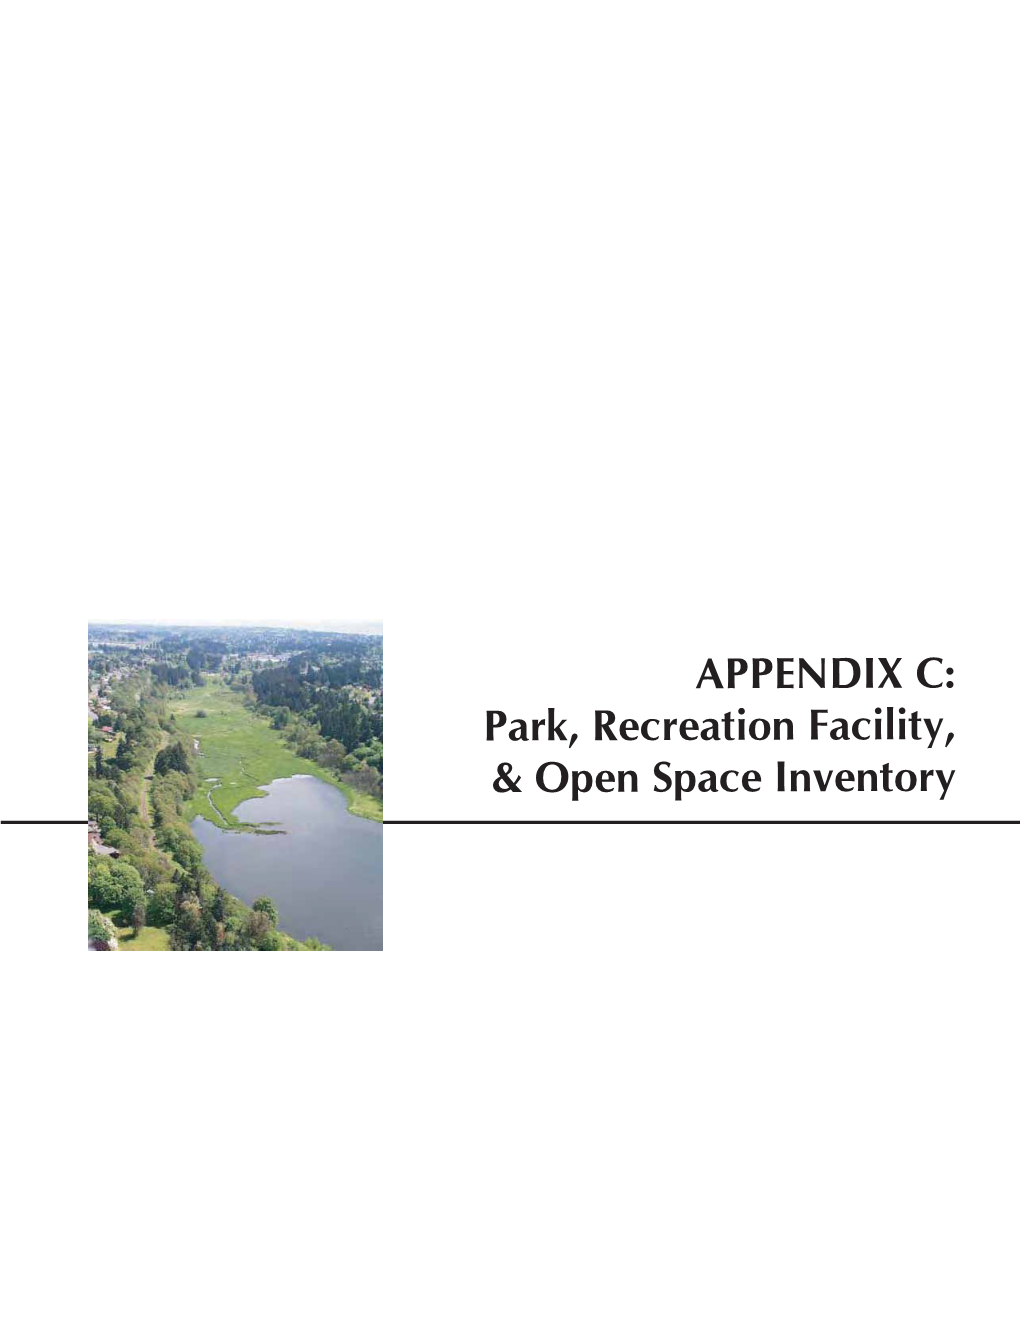 Park, Recreation Facility, & Open Space Inventory